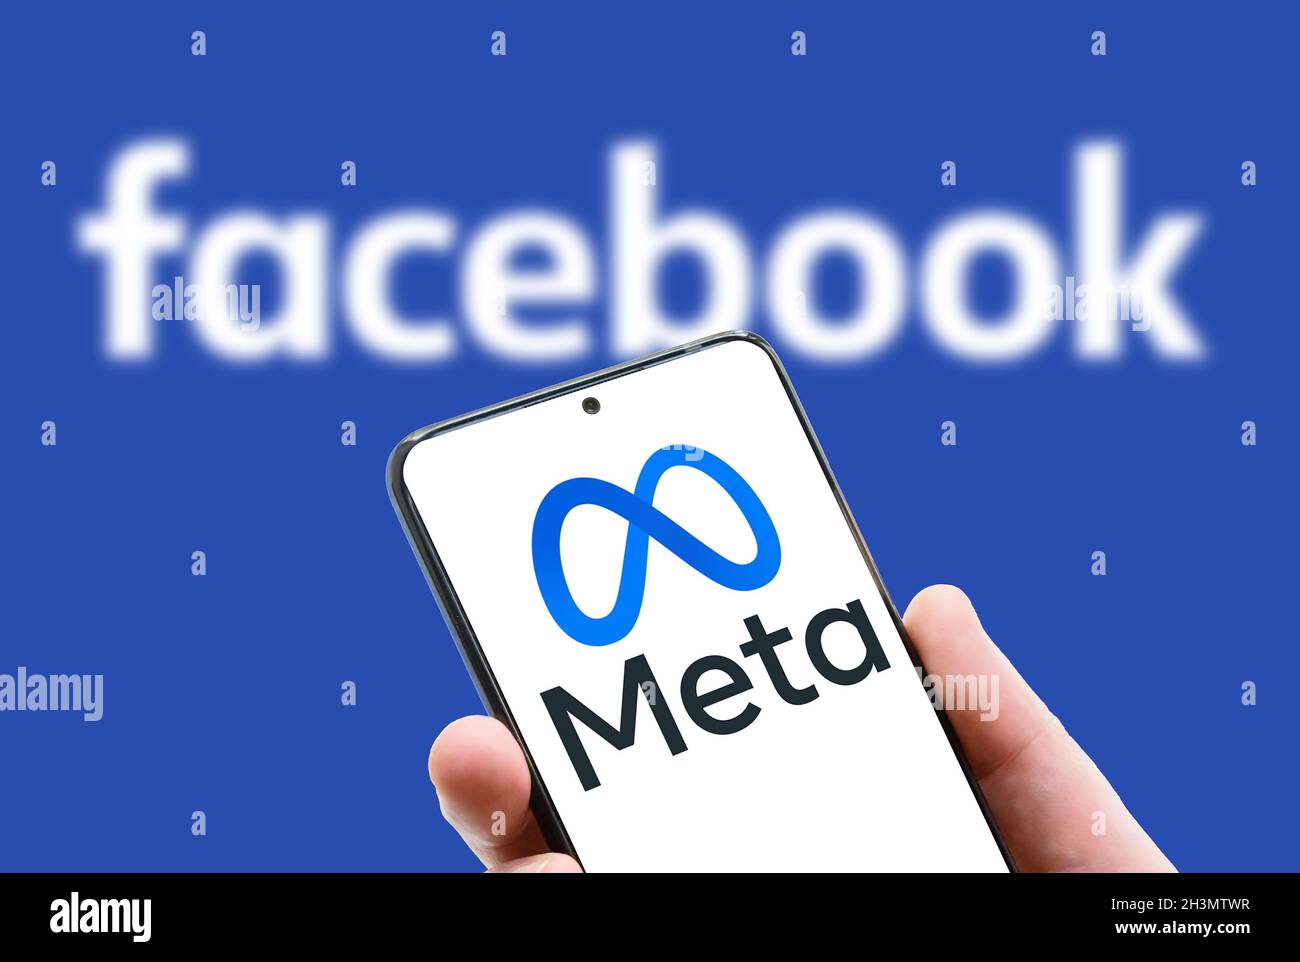 Moscow - 29 Oct, 2021: Meta logo on screen of mobile phone on Facebook word background. Facebook after rebranding and changing name to Meta. Facebook Stock Photo